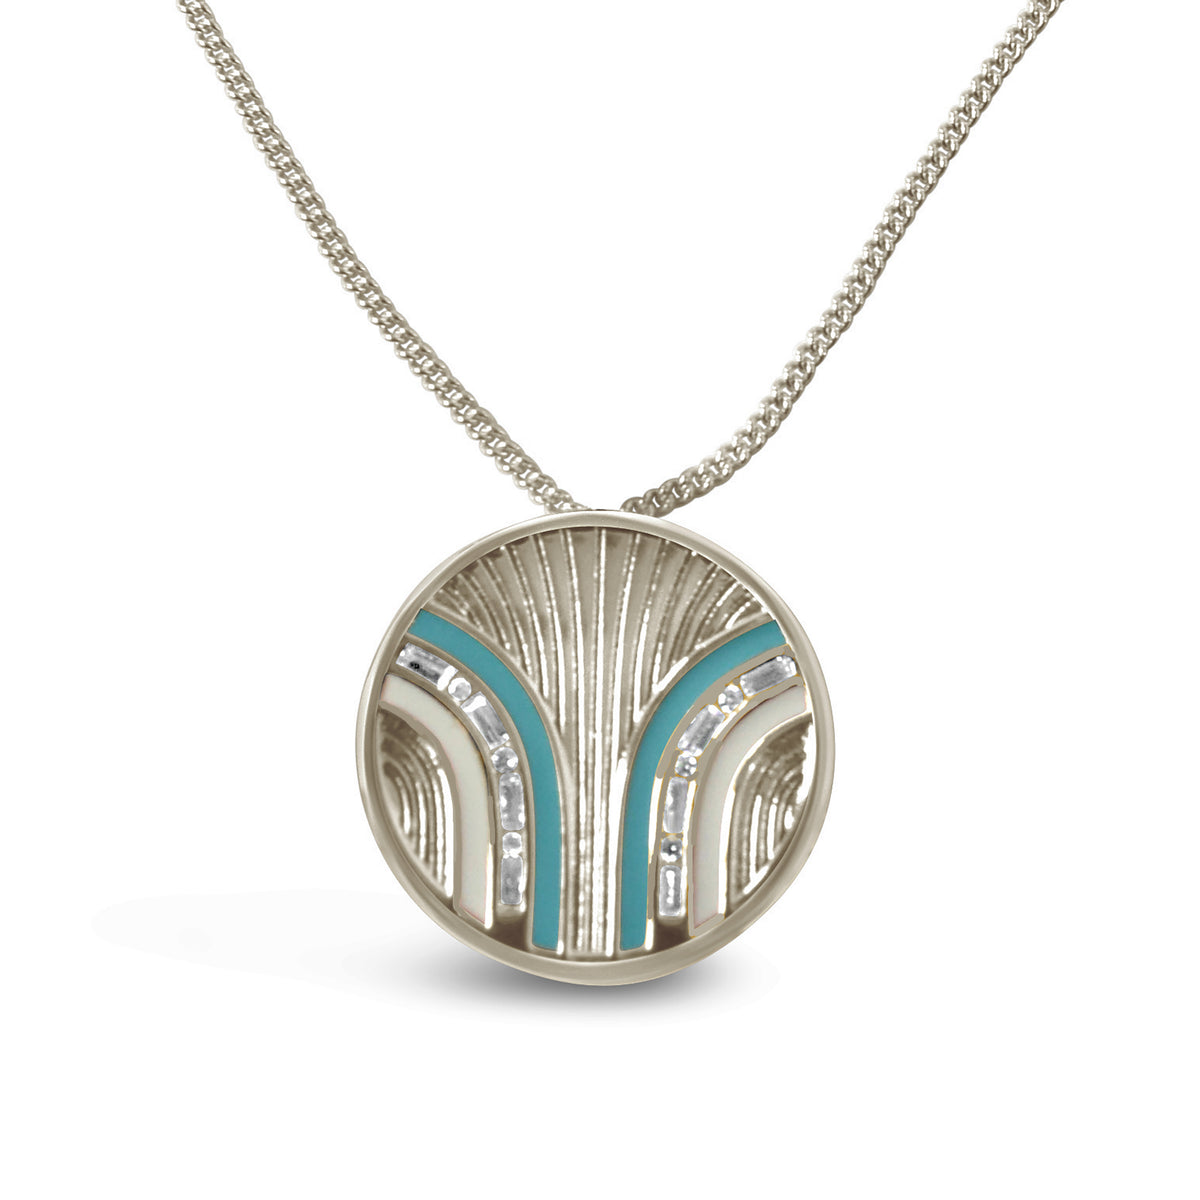 South Beach Coin Necklace - Turquoise/White